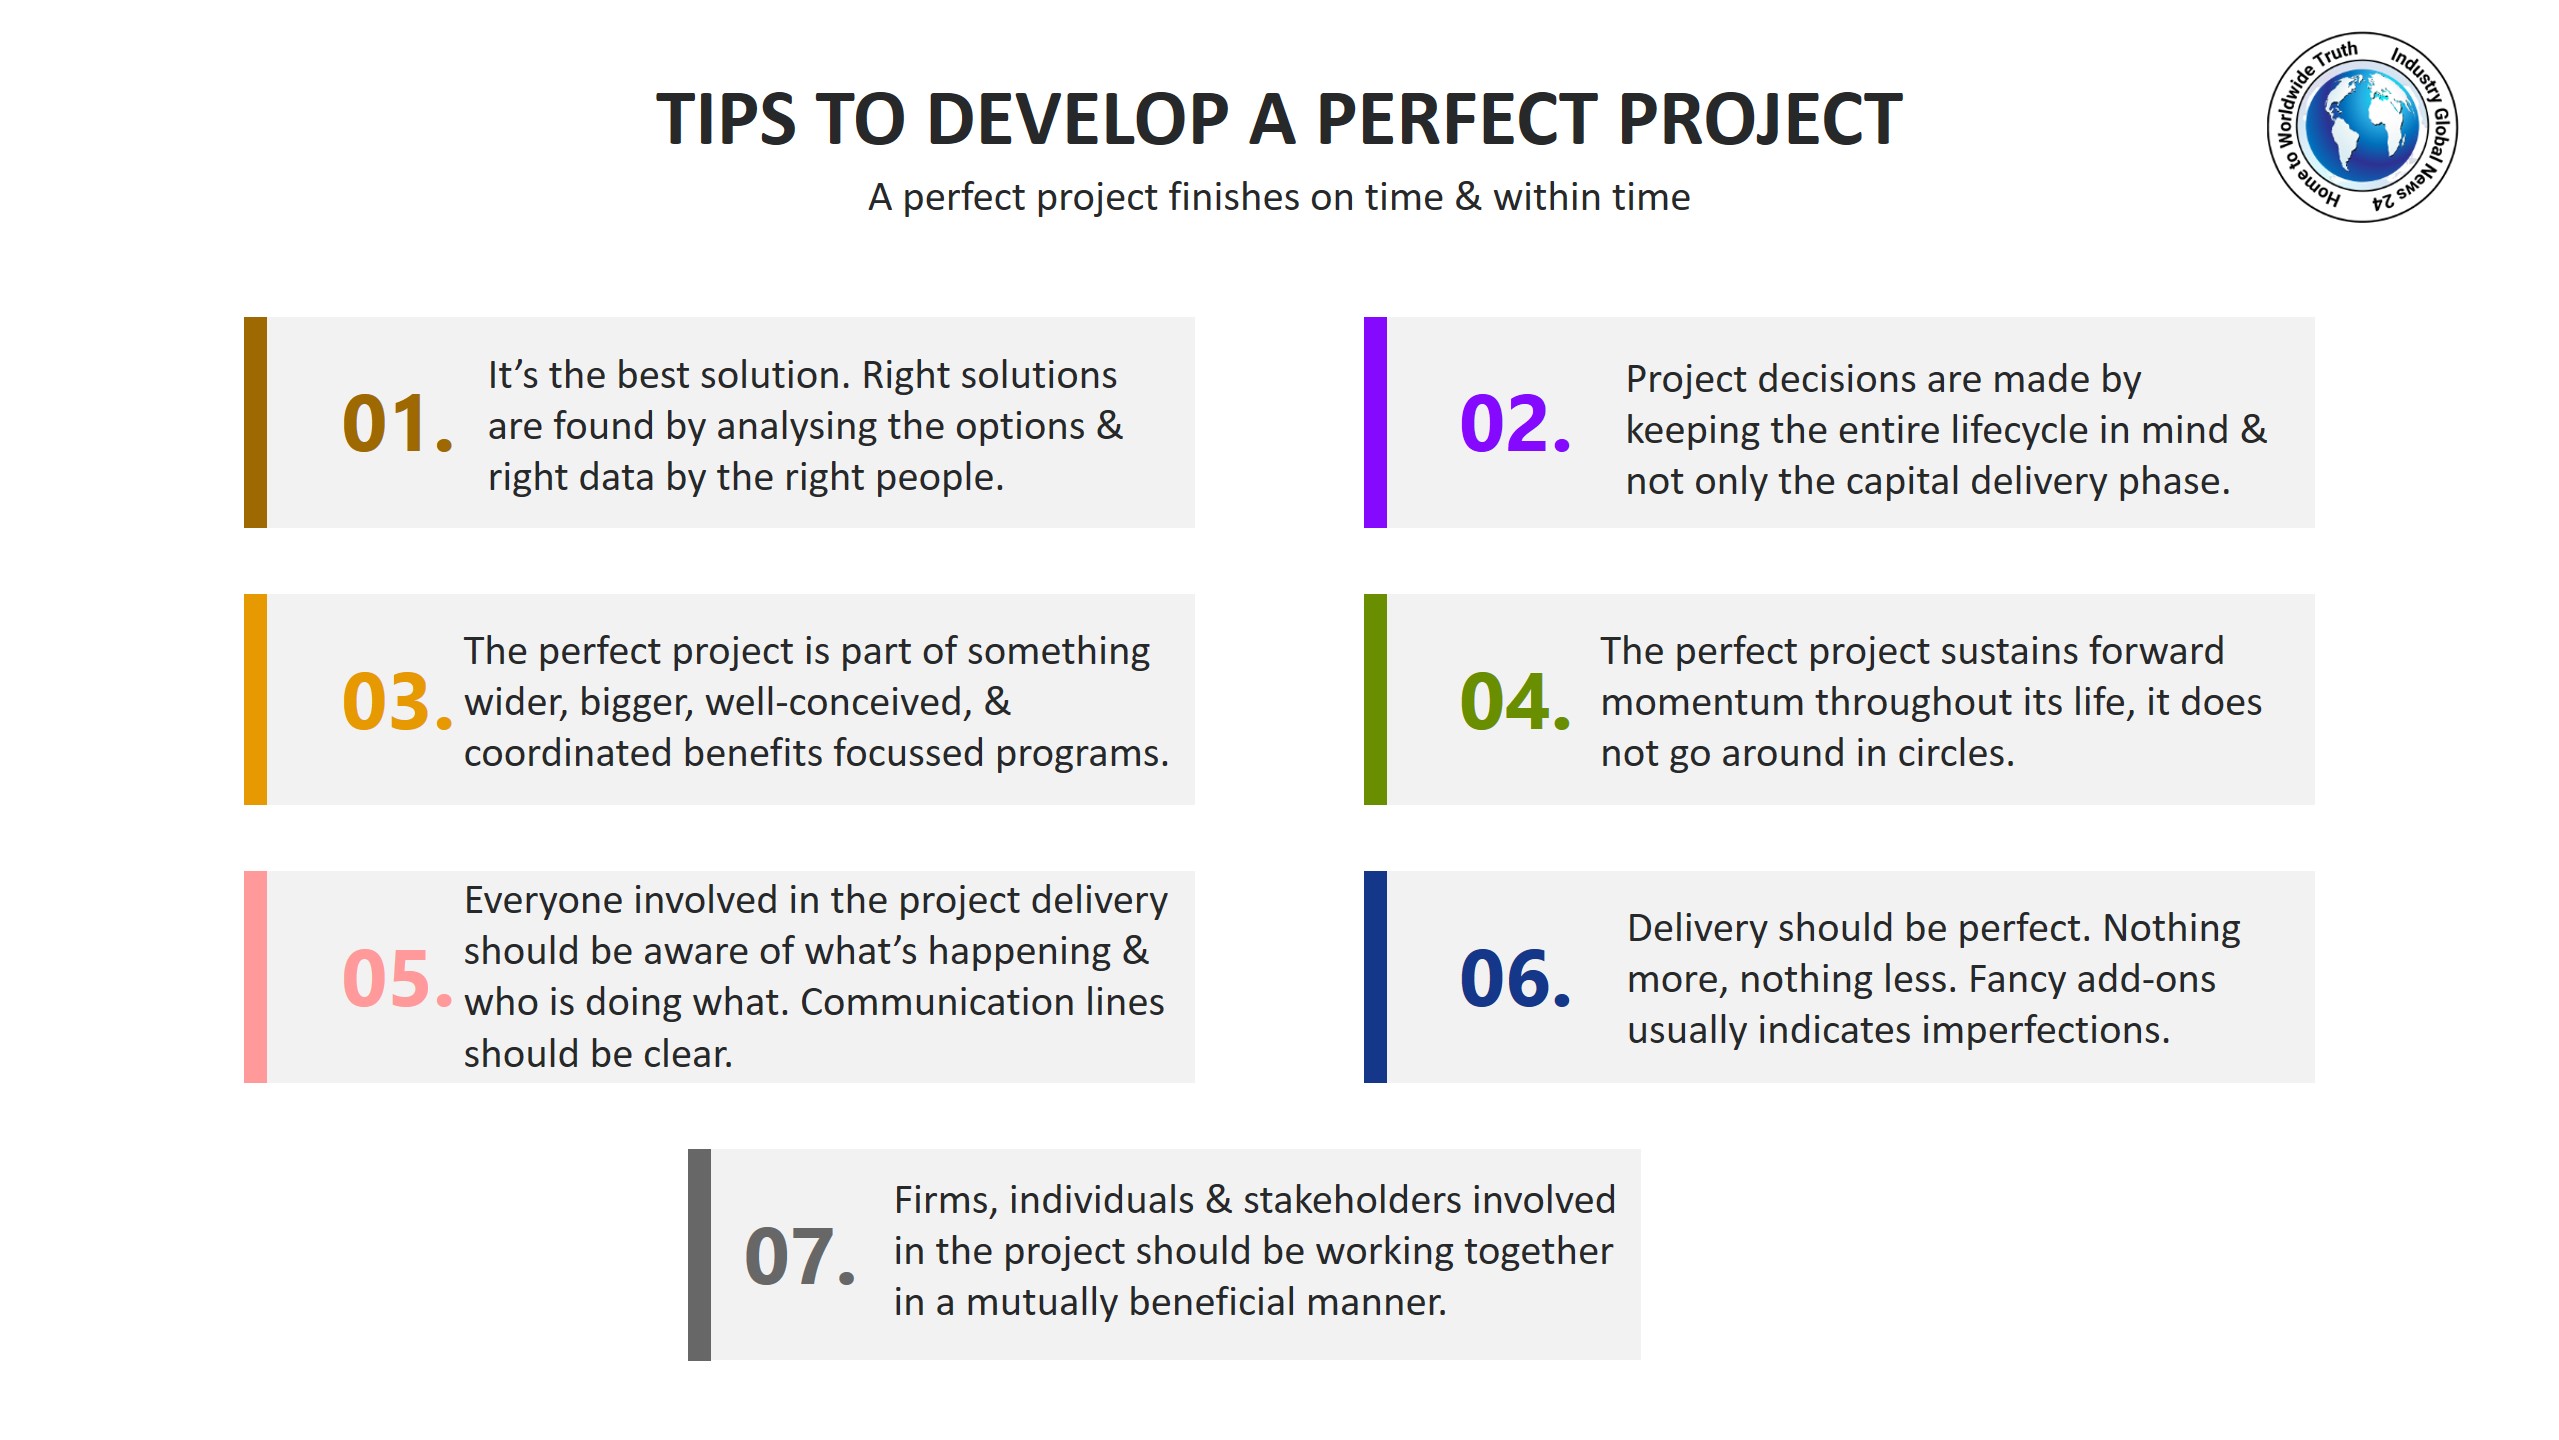 Tips to develop a perfect project